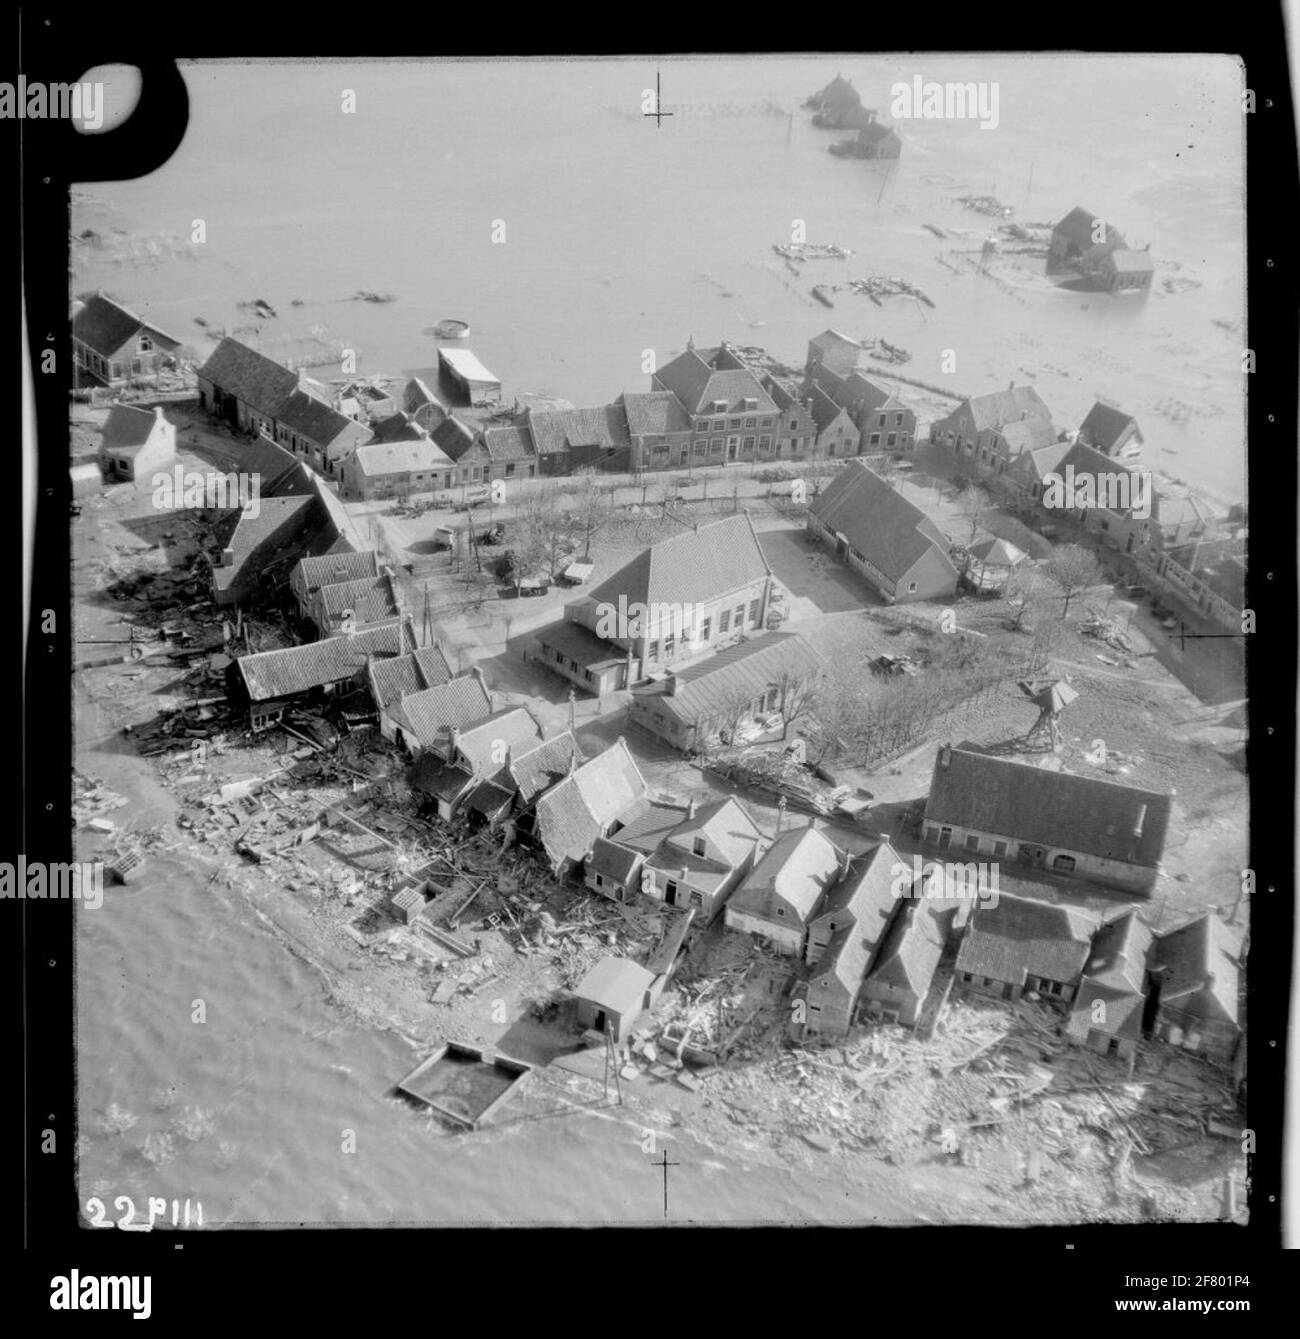 Watersnoodramp 1953. Air photo of Ouwerkerk and an overview of the area affected by the disaster. Stock Photo